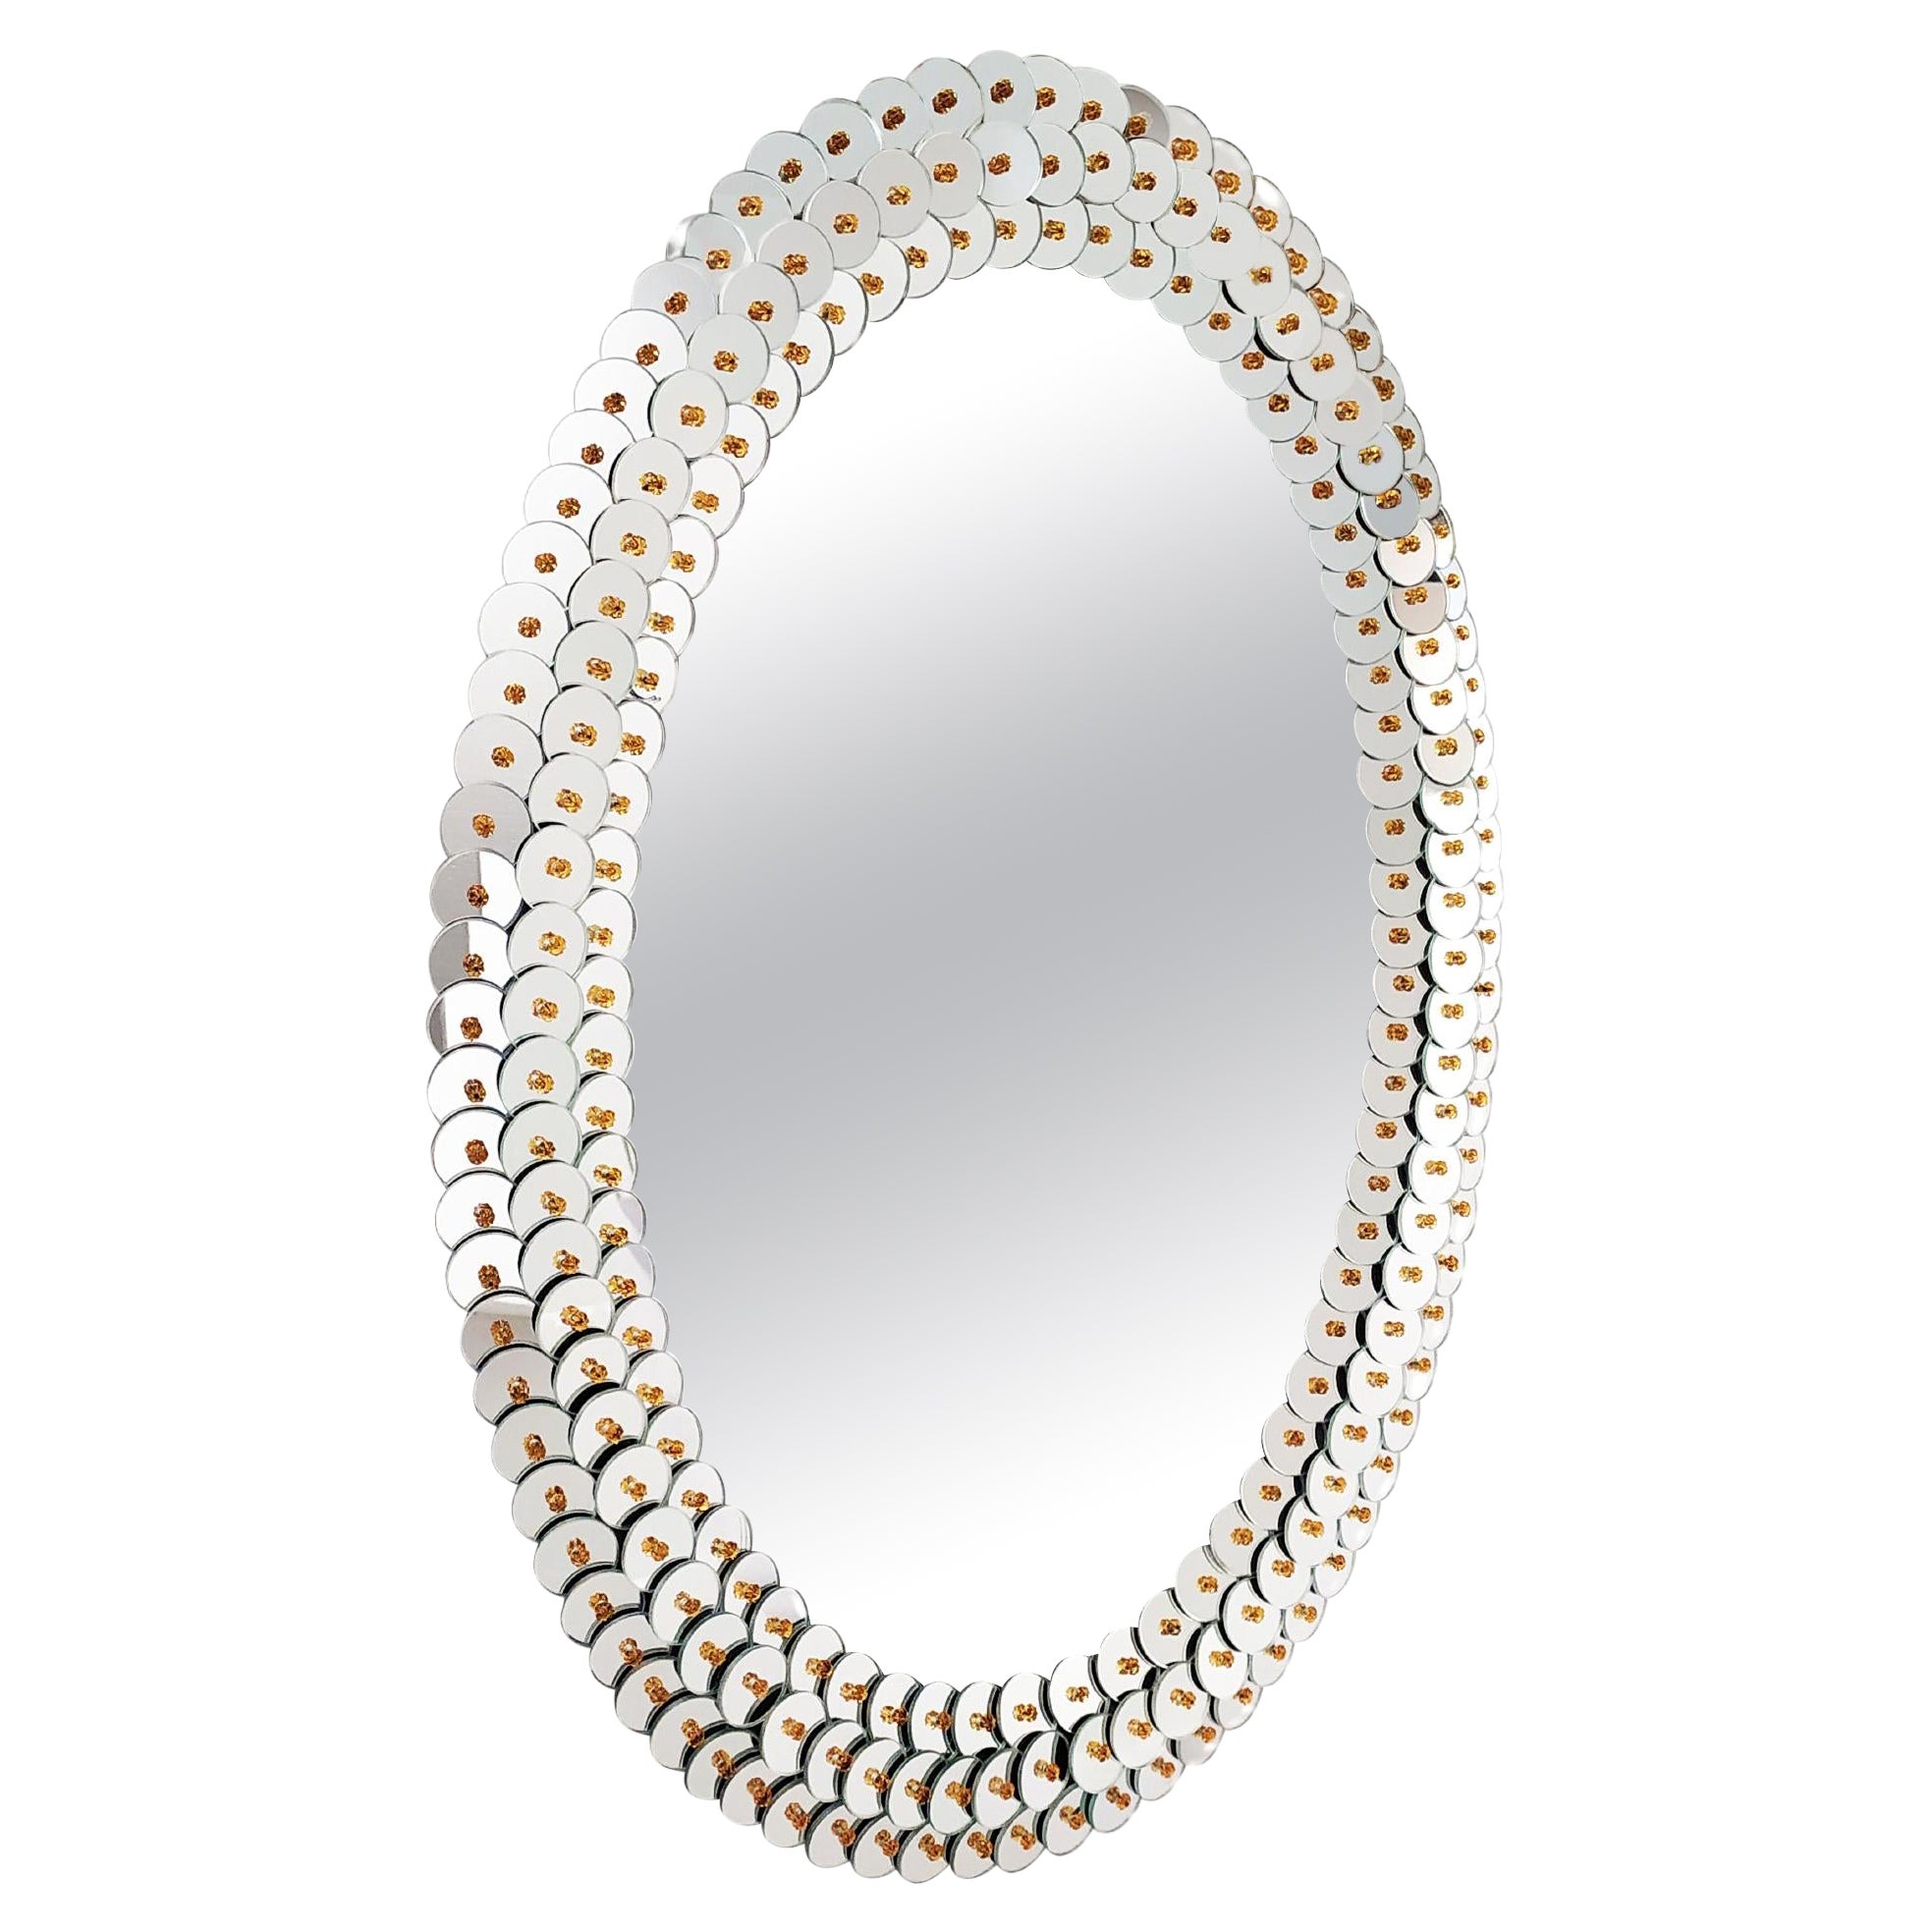 "Payette" Murano Glass Mirror Contempory, Handmade by Fratelli Tosi